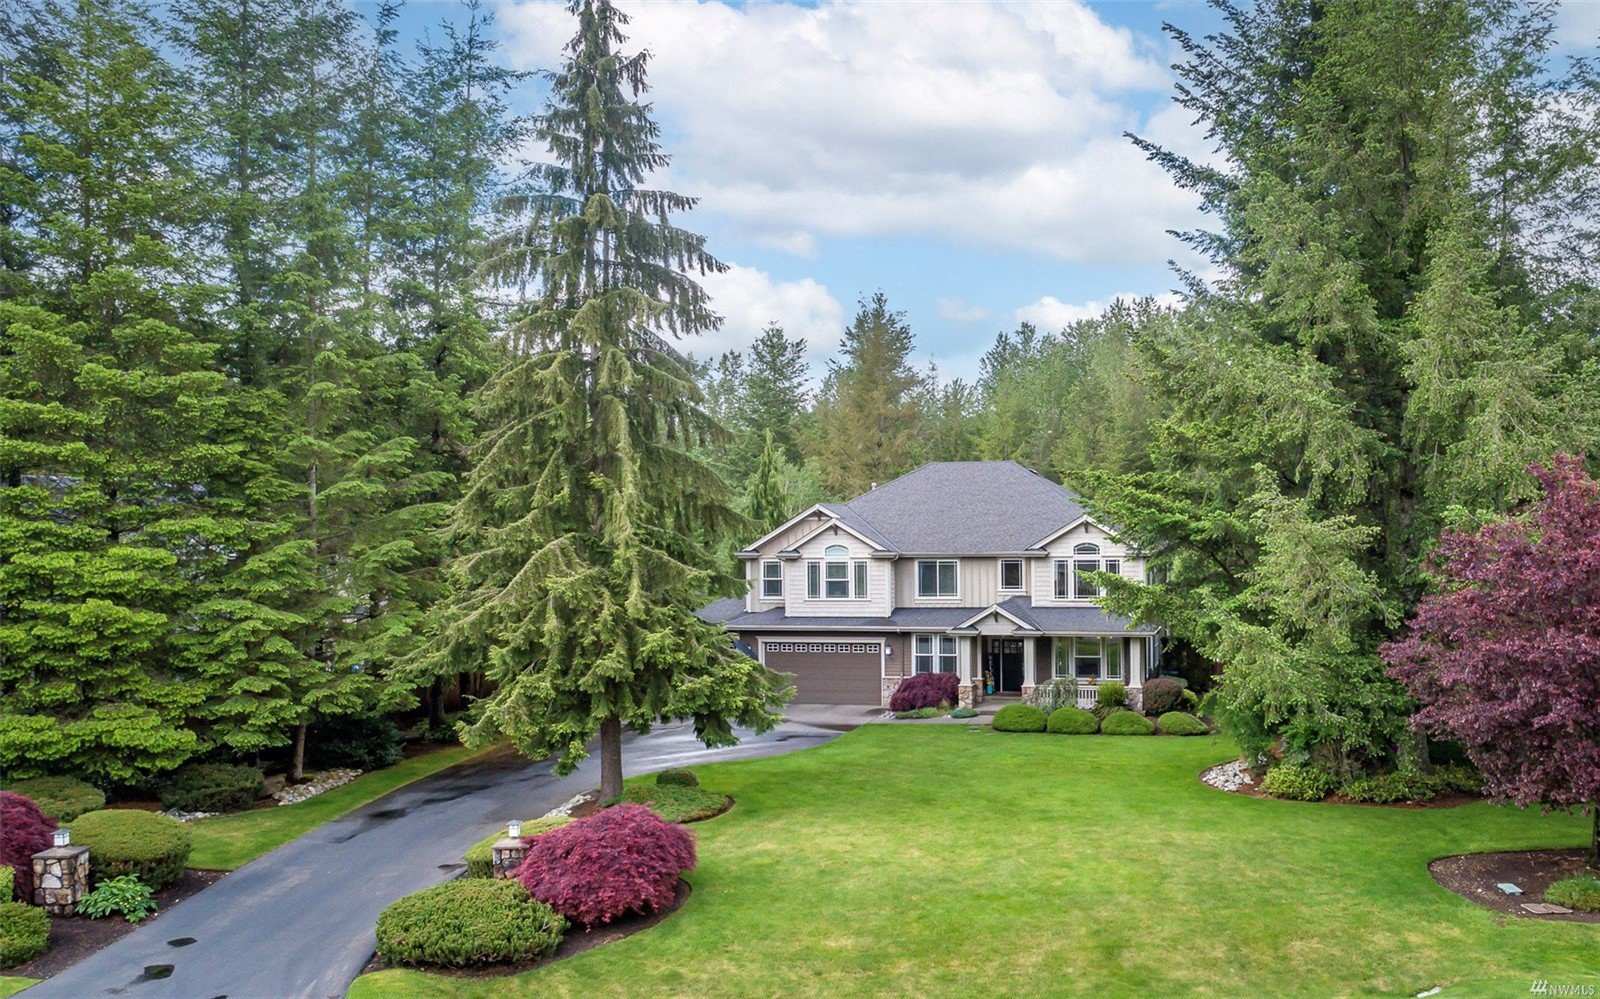 26426 SE 273rd Place, Ravensdale | Sold for $1,444,000 | Buyer Represented